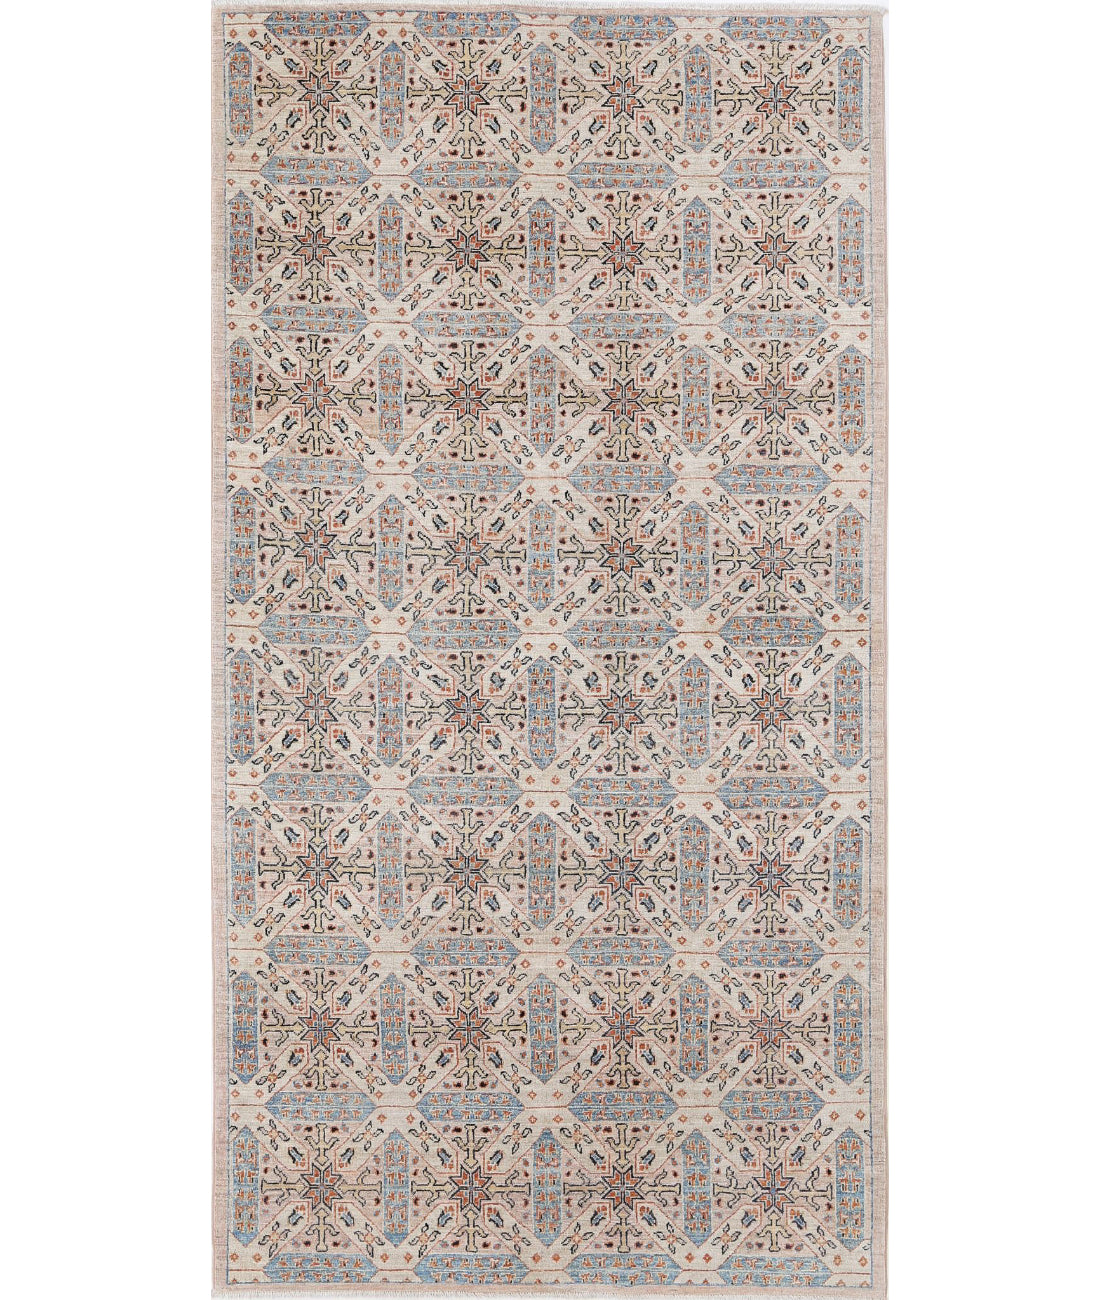 Hand Knotted Artemix Wool Rug - 4'10'' x 9'4'' 4'10'' x 9'4'' (145 X 280) / Ivory / Blue